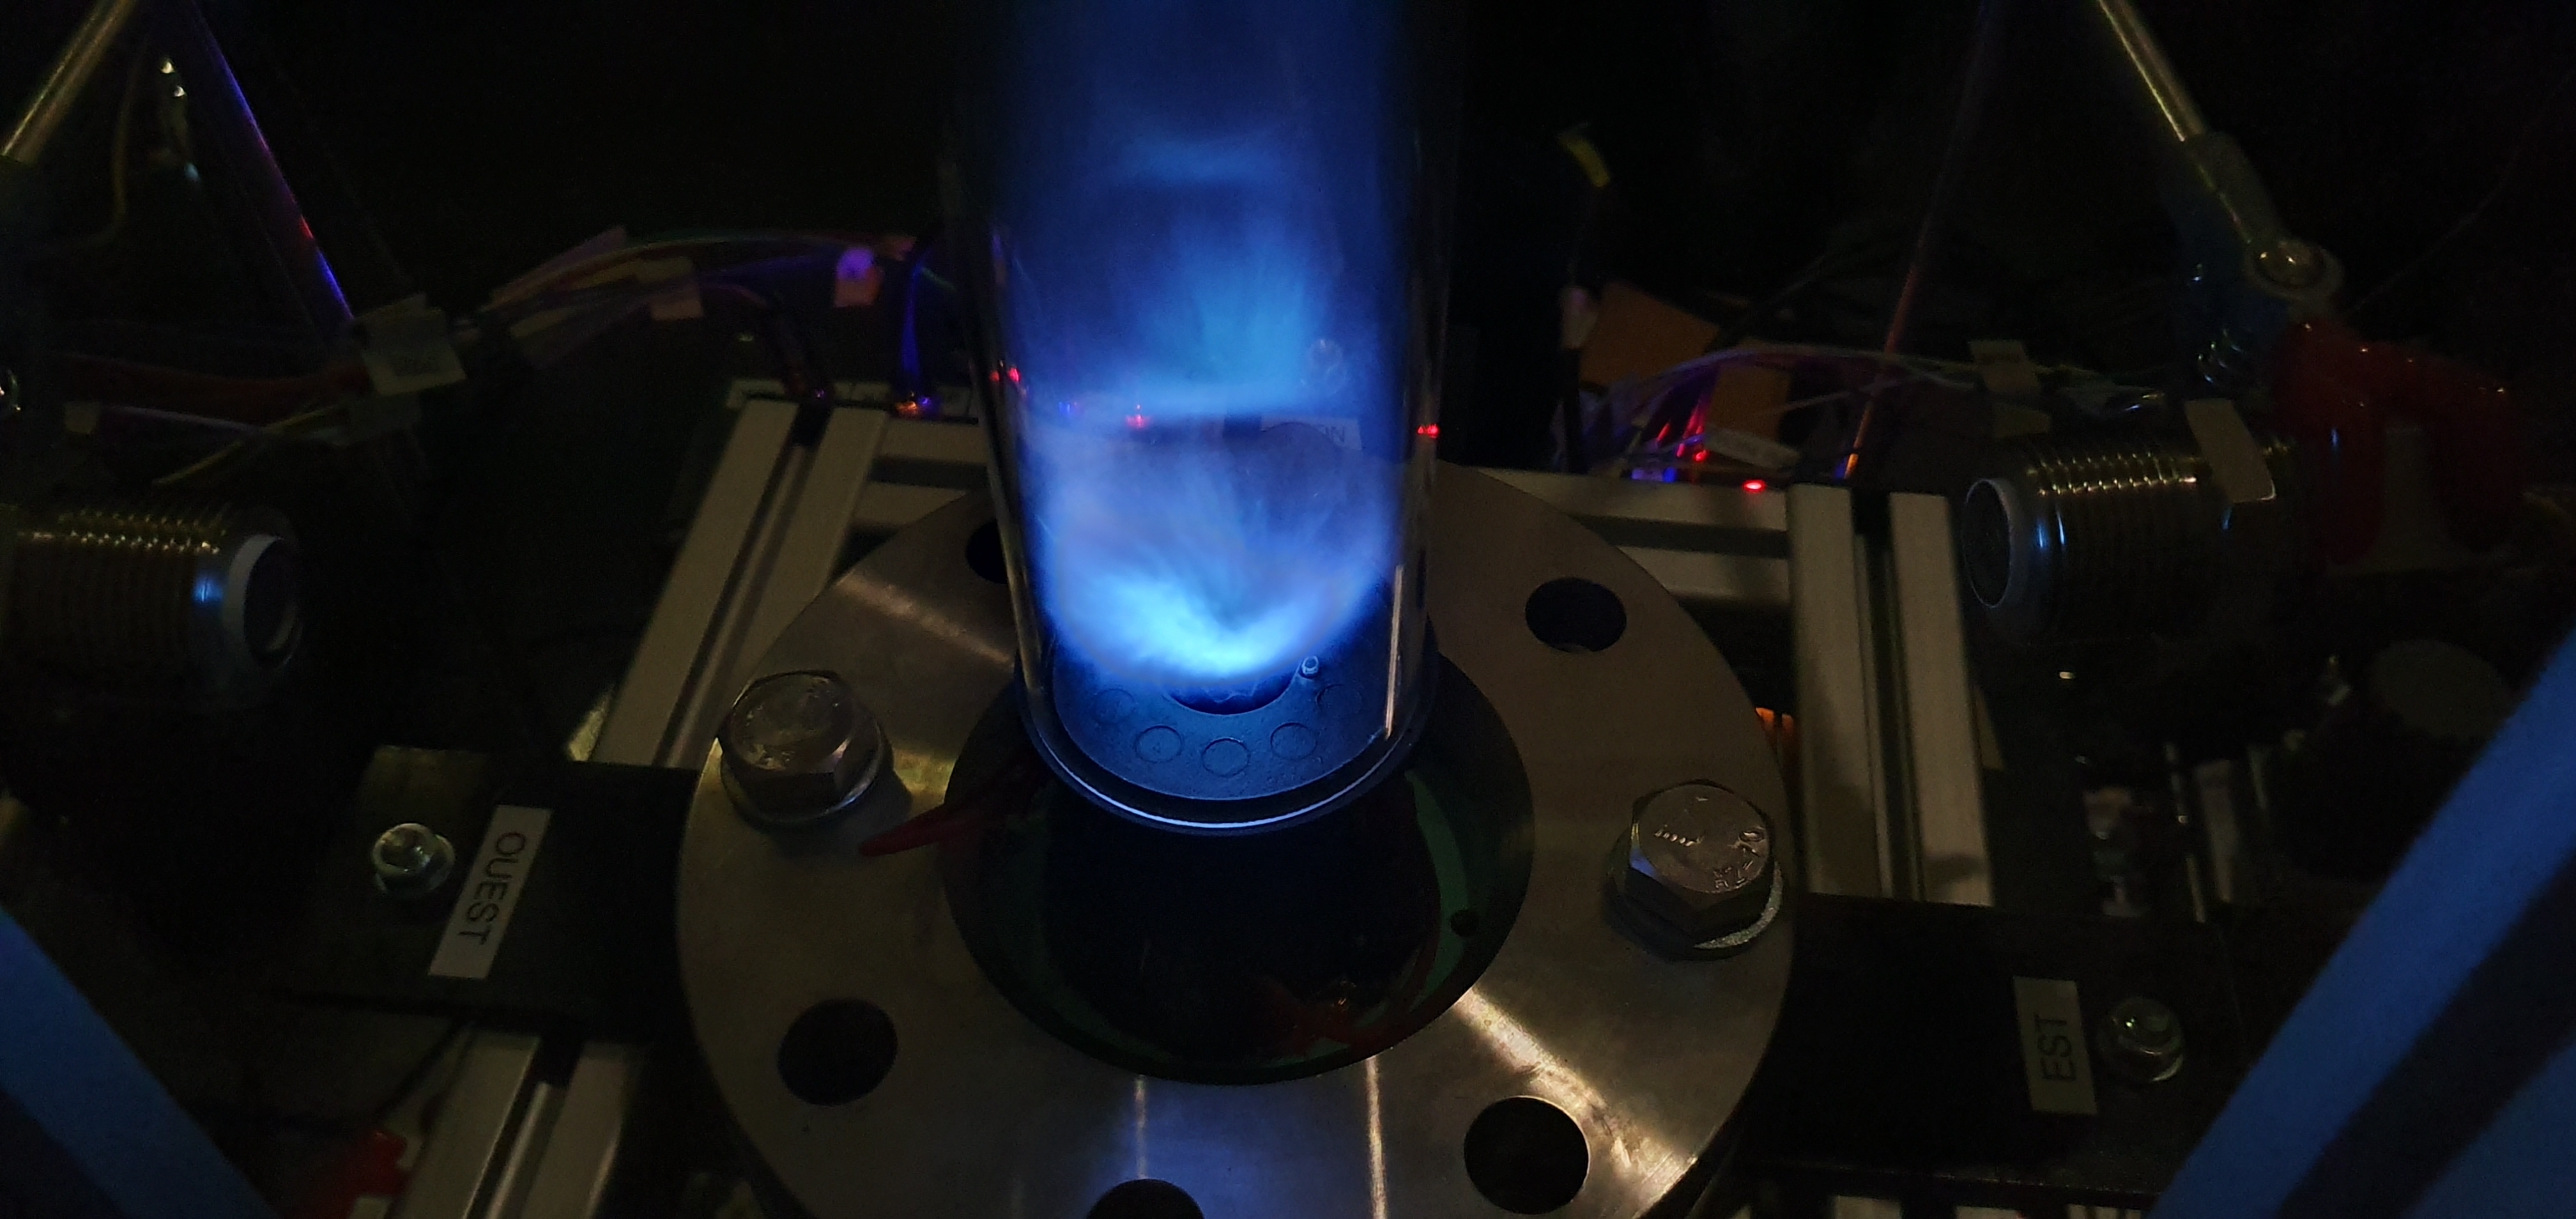 Free-jet study of the CBO4 flame. The RCP probes are situated to the left and to the right of the flame.